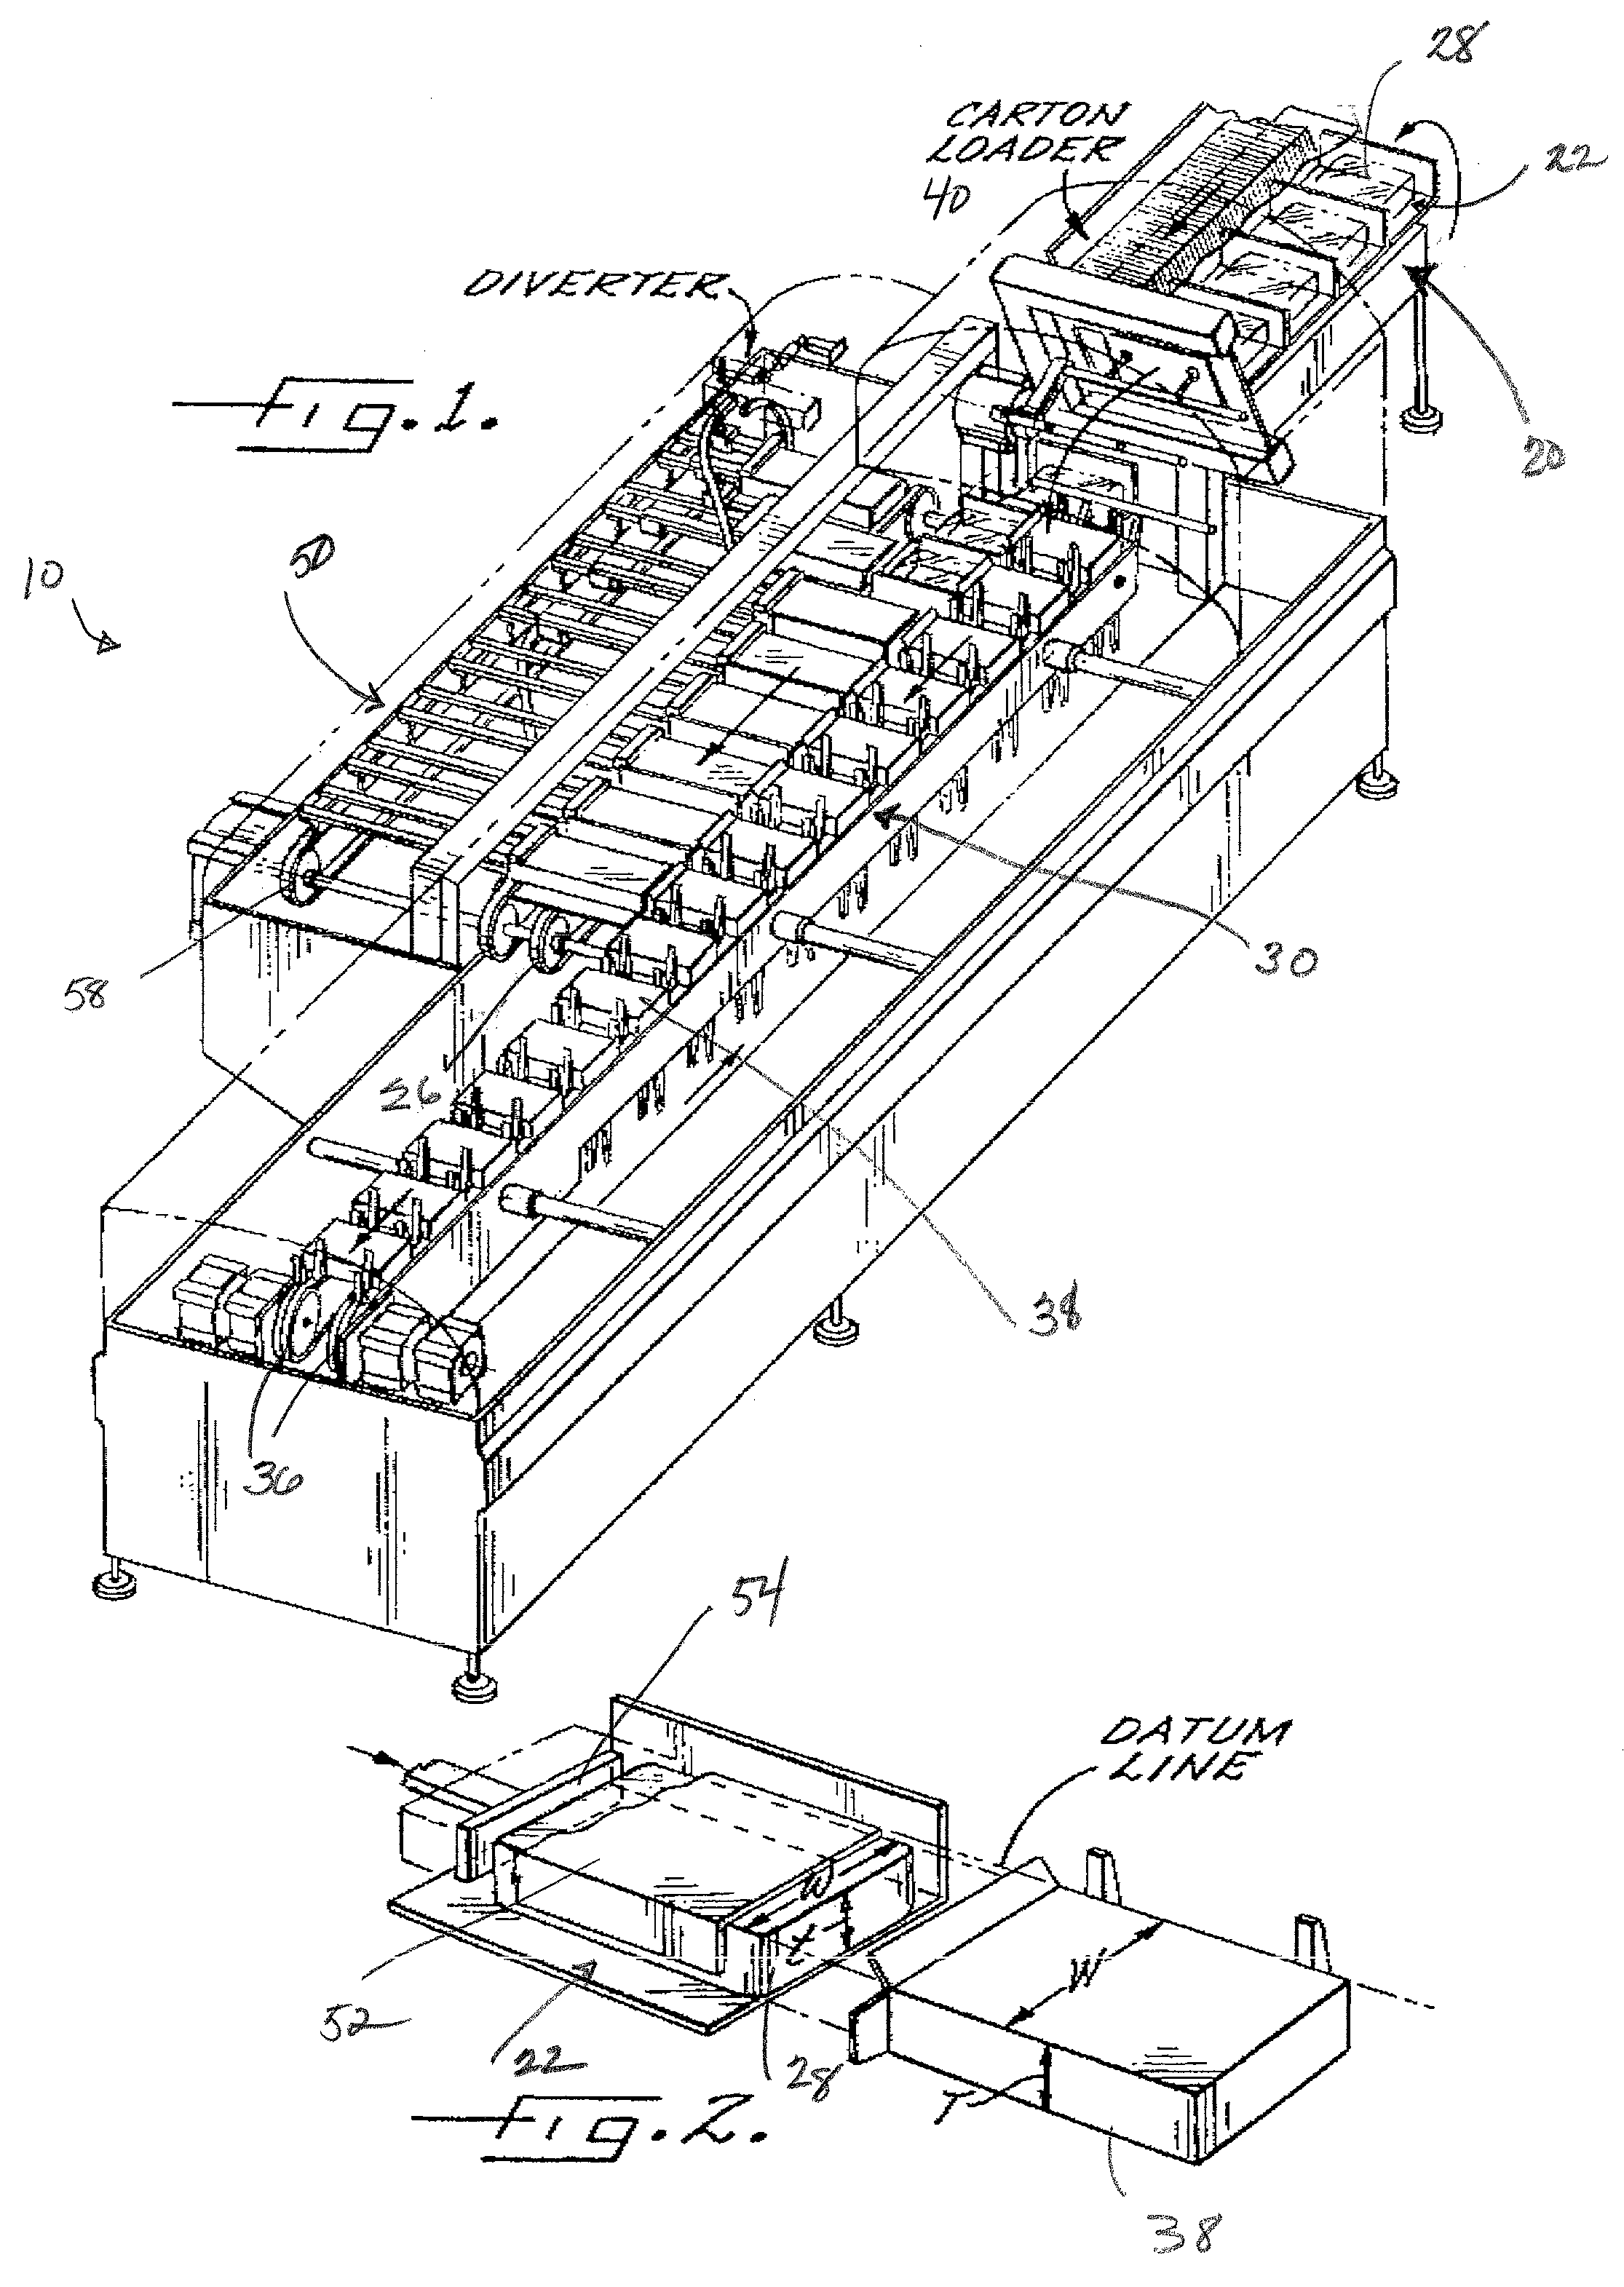 Integrated barrel loader and confiner apparatus for use in a cartoning system